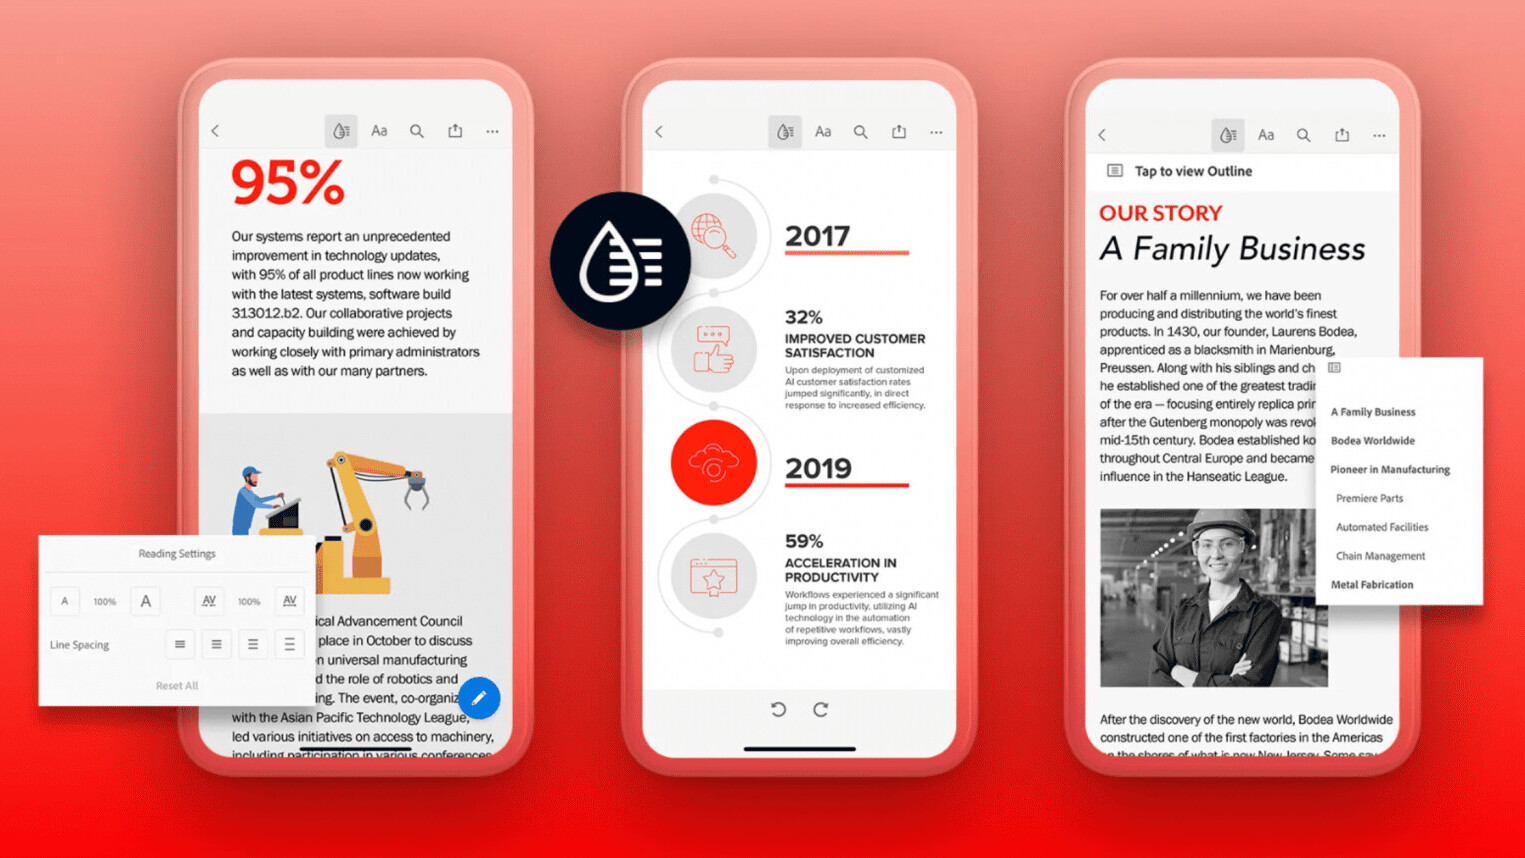 Adobe is making it less of a nightmare to read PDFs on your phone